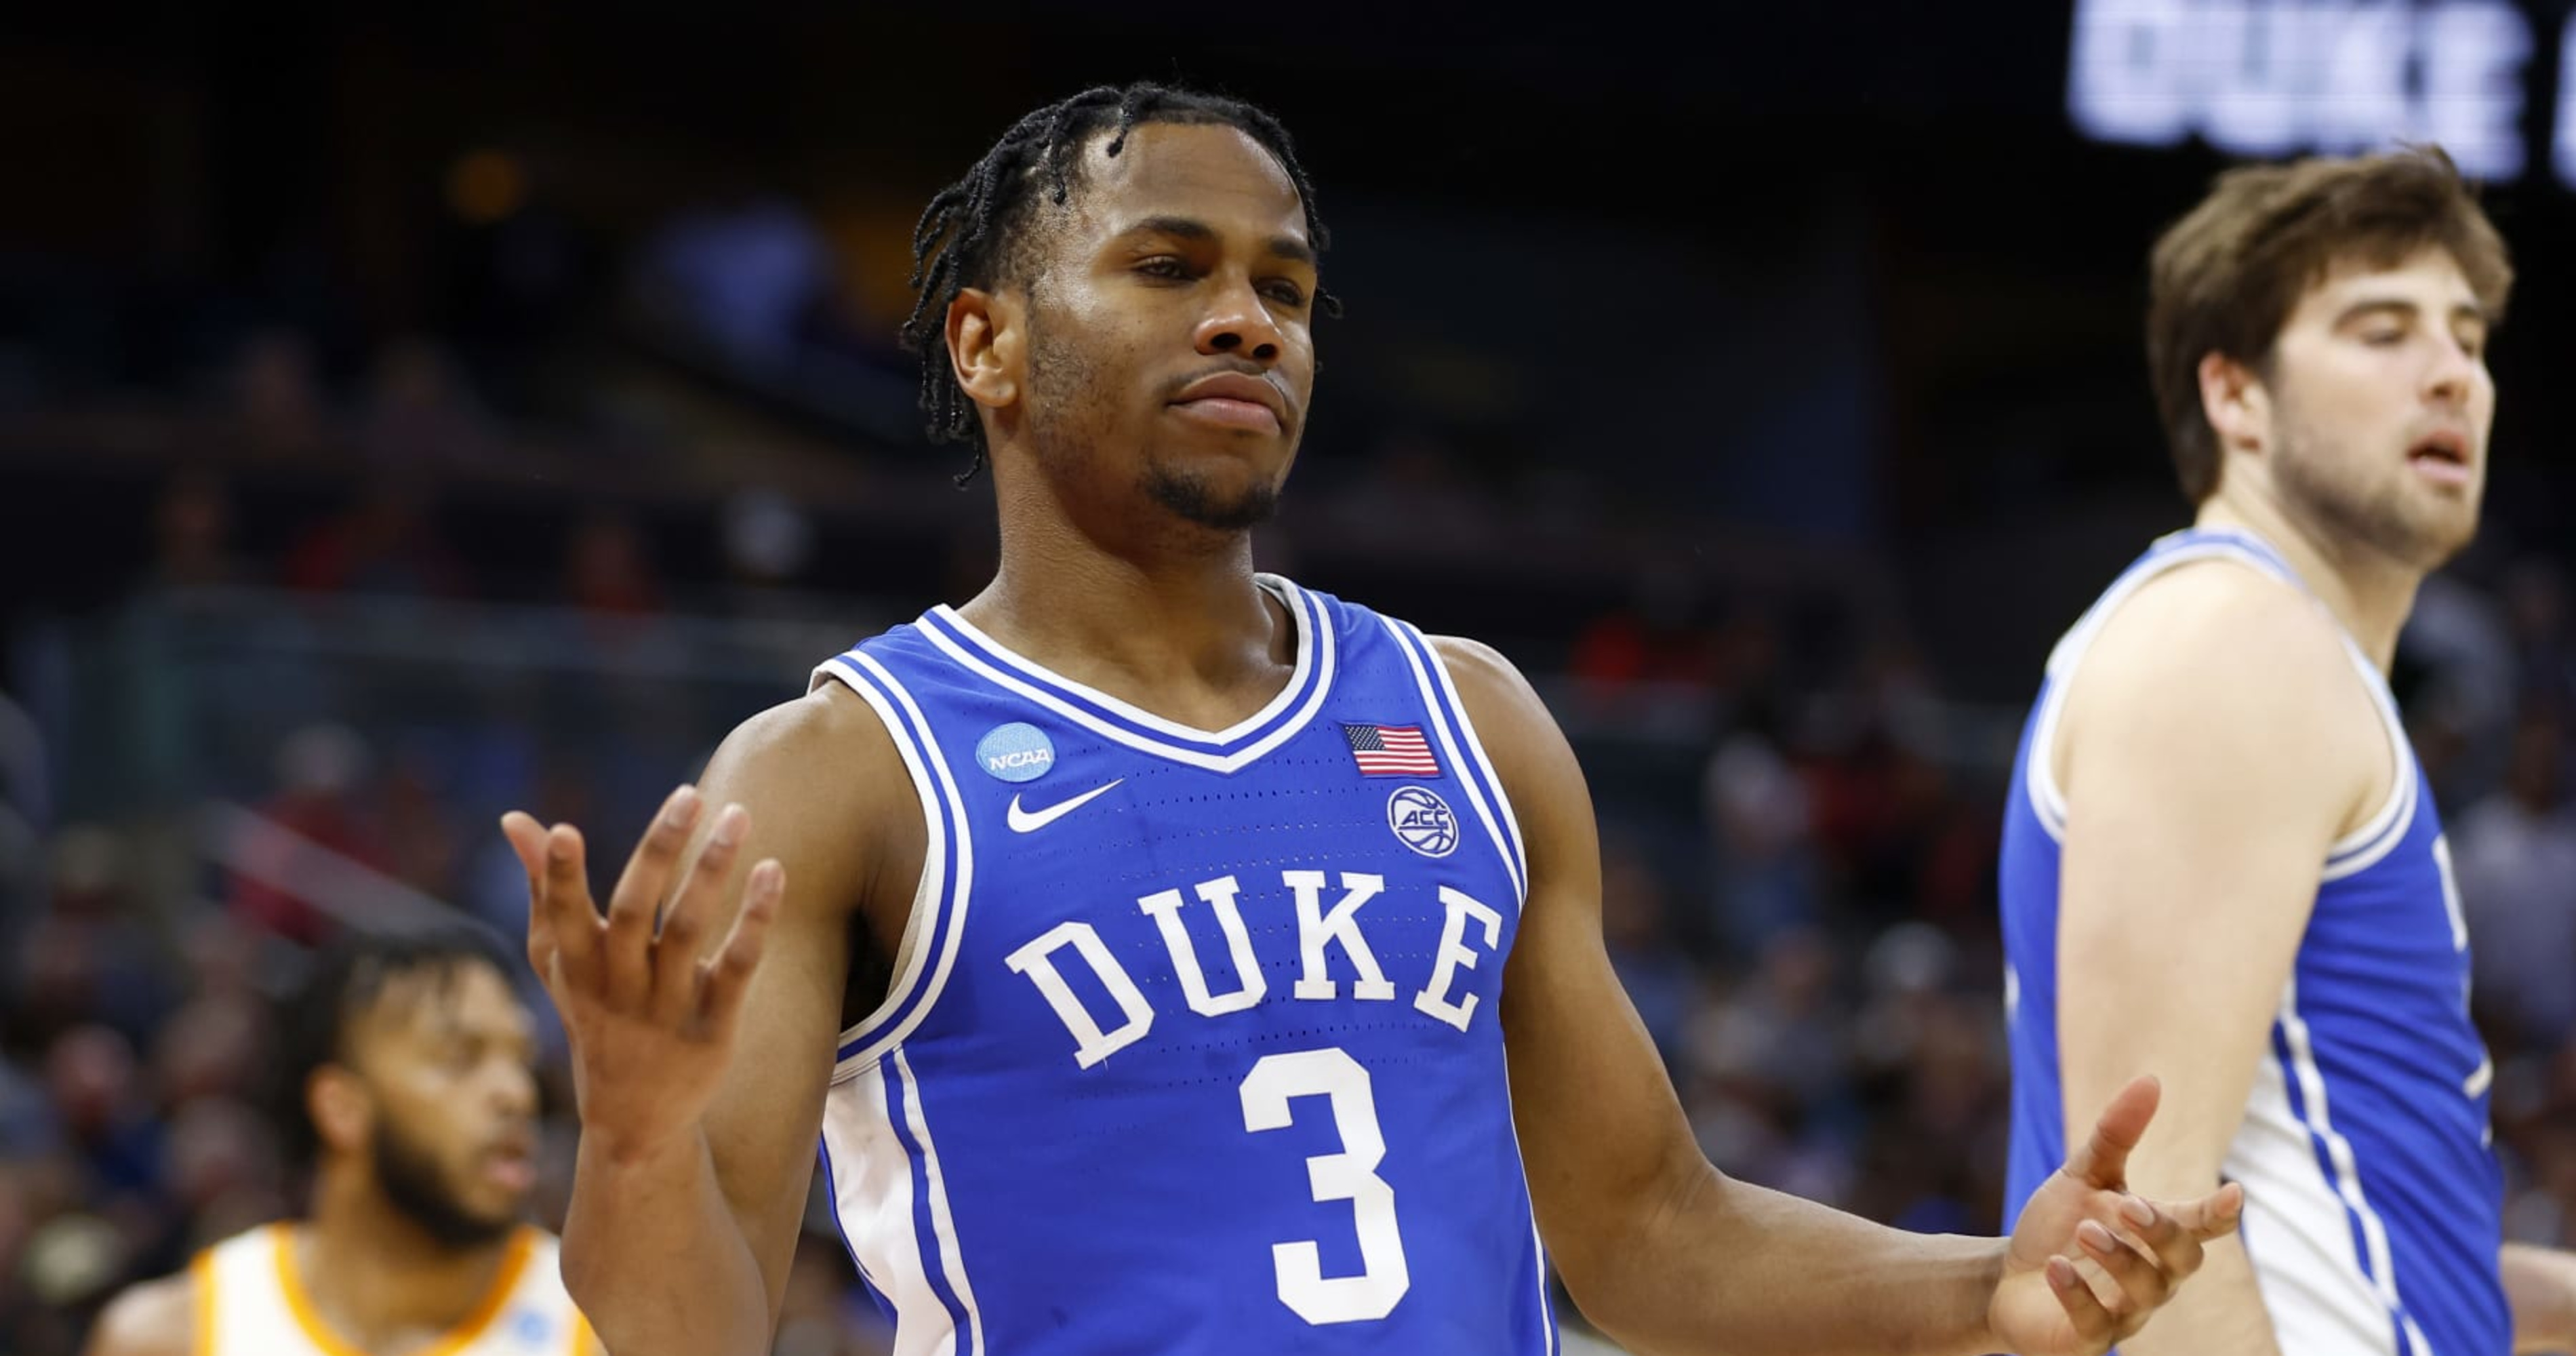 Jeremy Roach Withdraws from 2023 NBA Draft, Will Return to Duke for